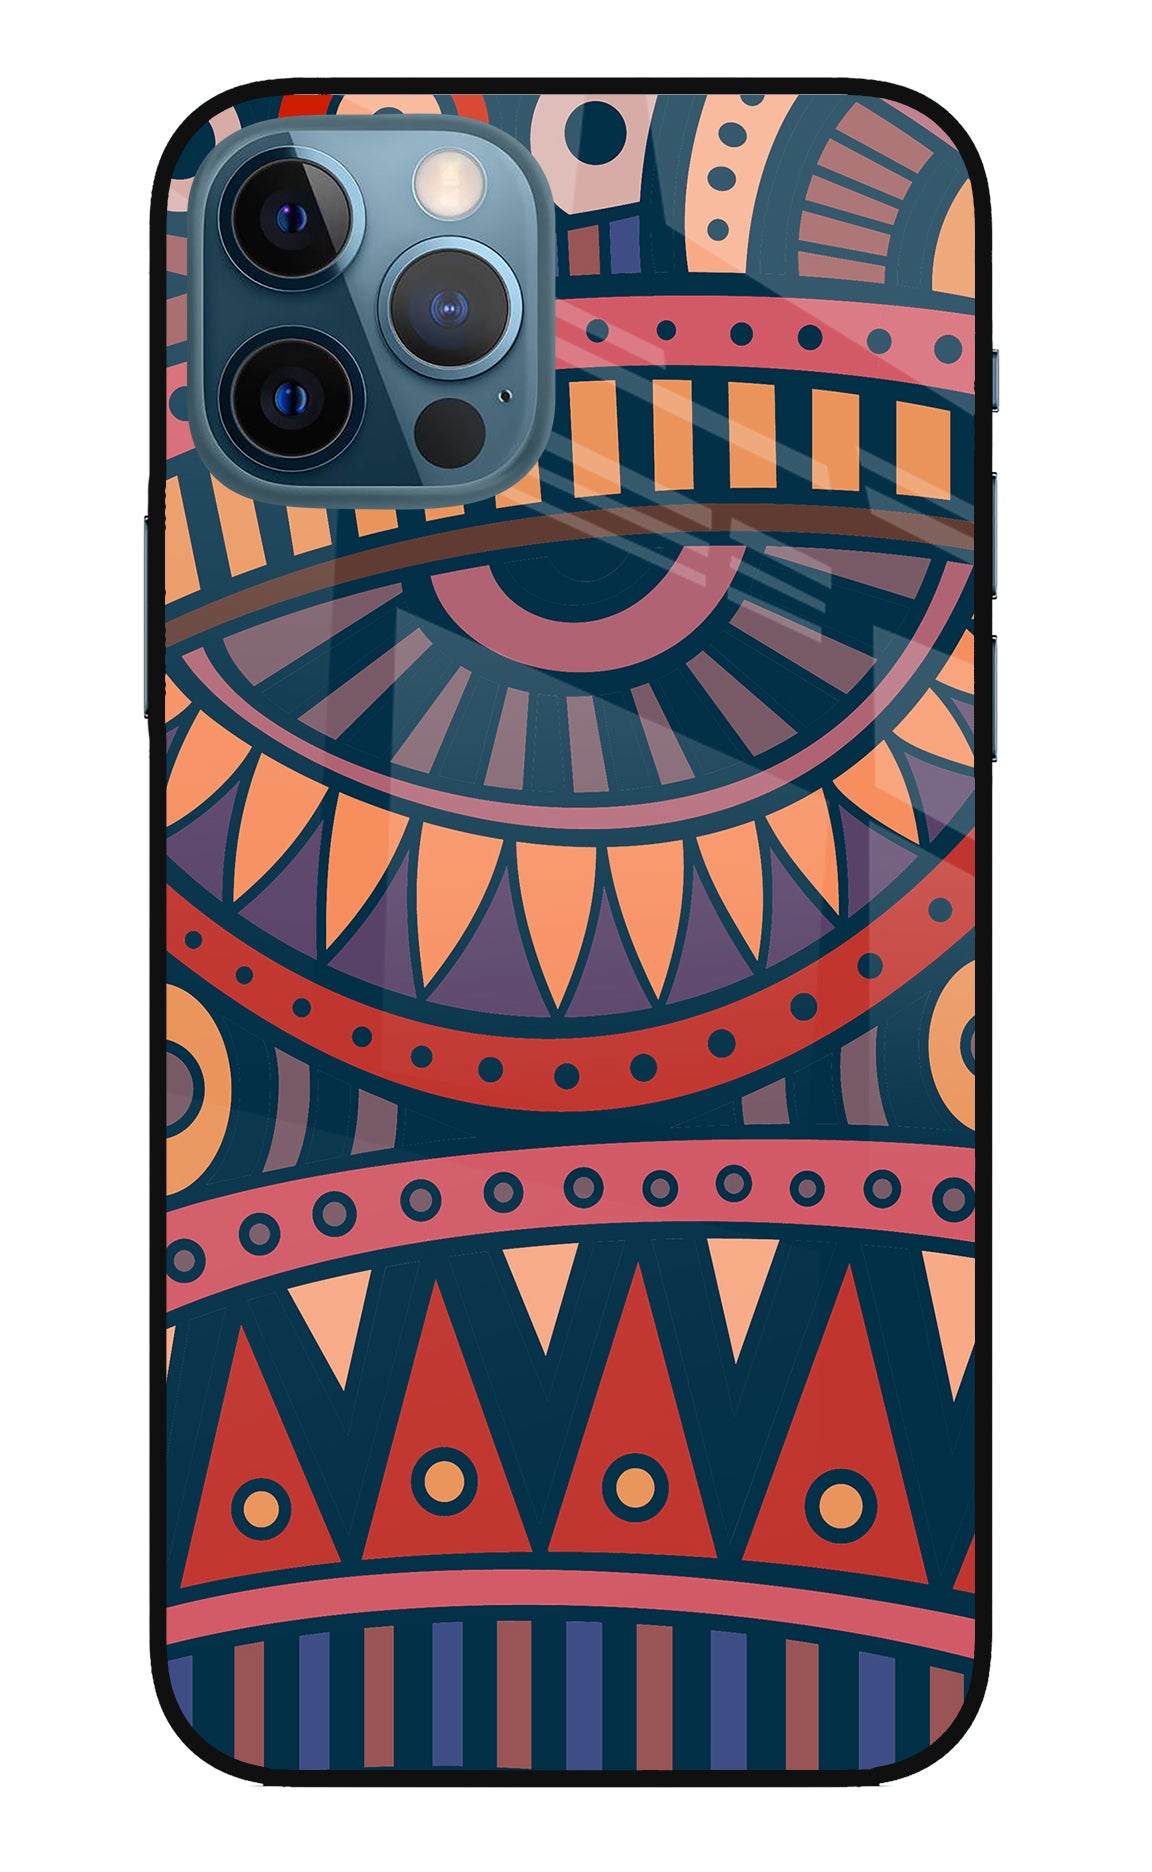 African Culture Design iPhone 12 Pro Back Cover